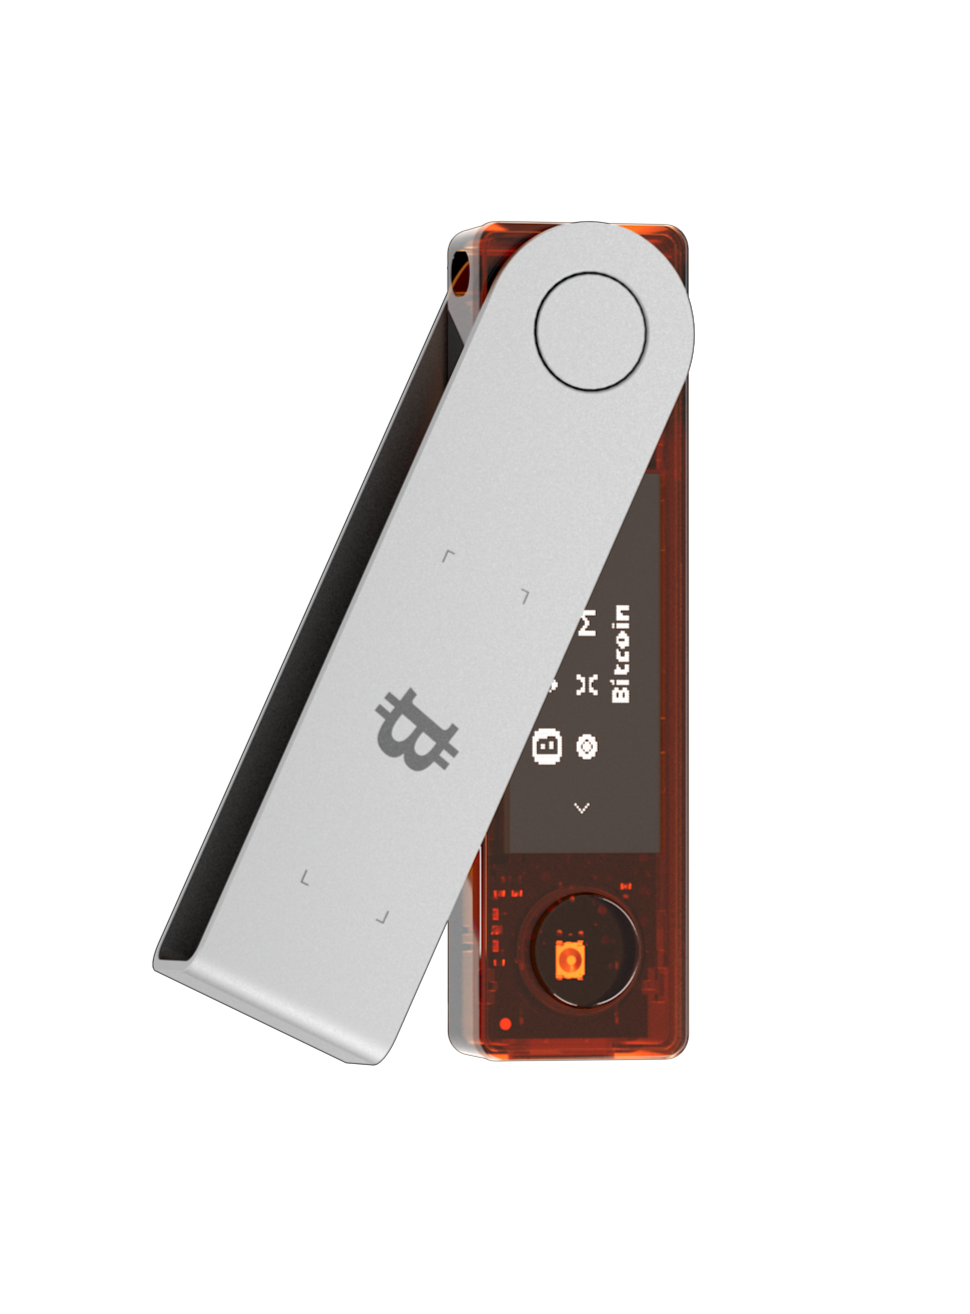 Ledger Nano X Cryptocurrency Bluetooth Hardware Wallet 3760027781500